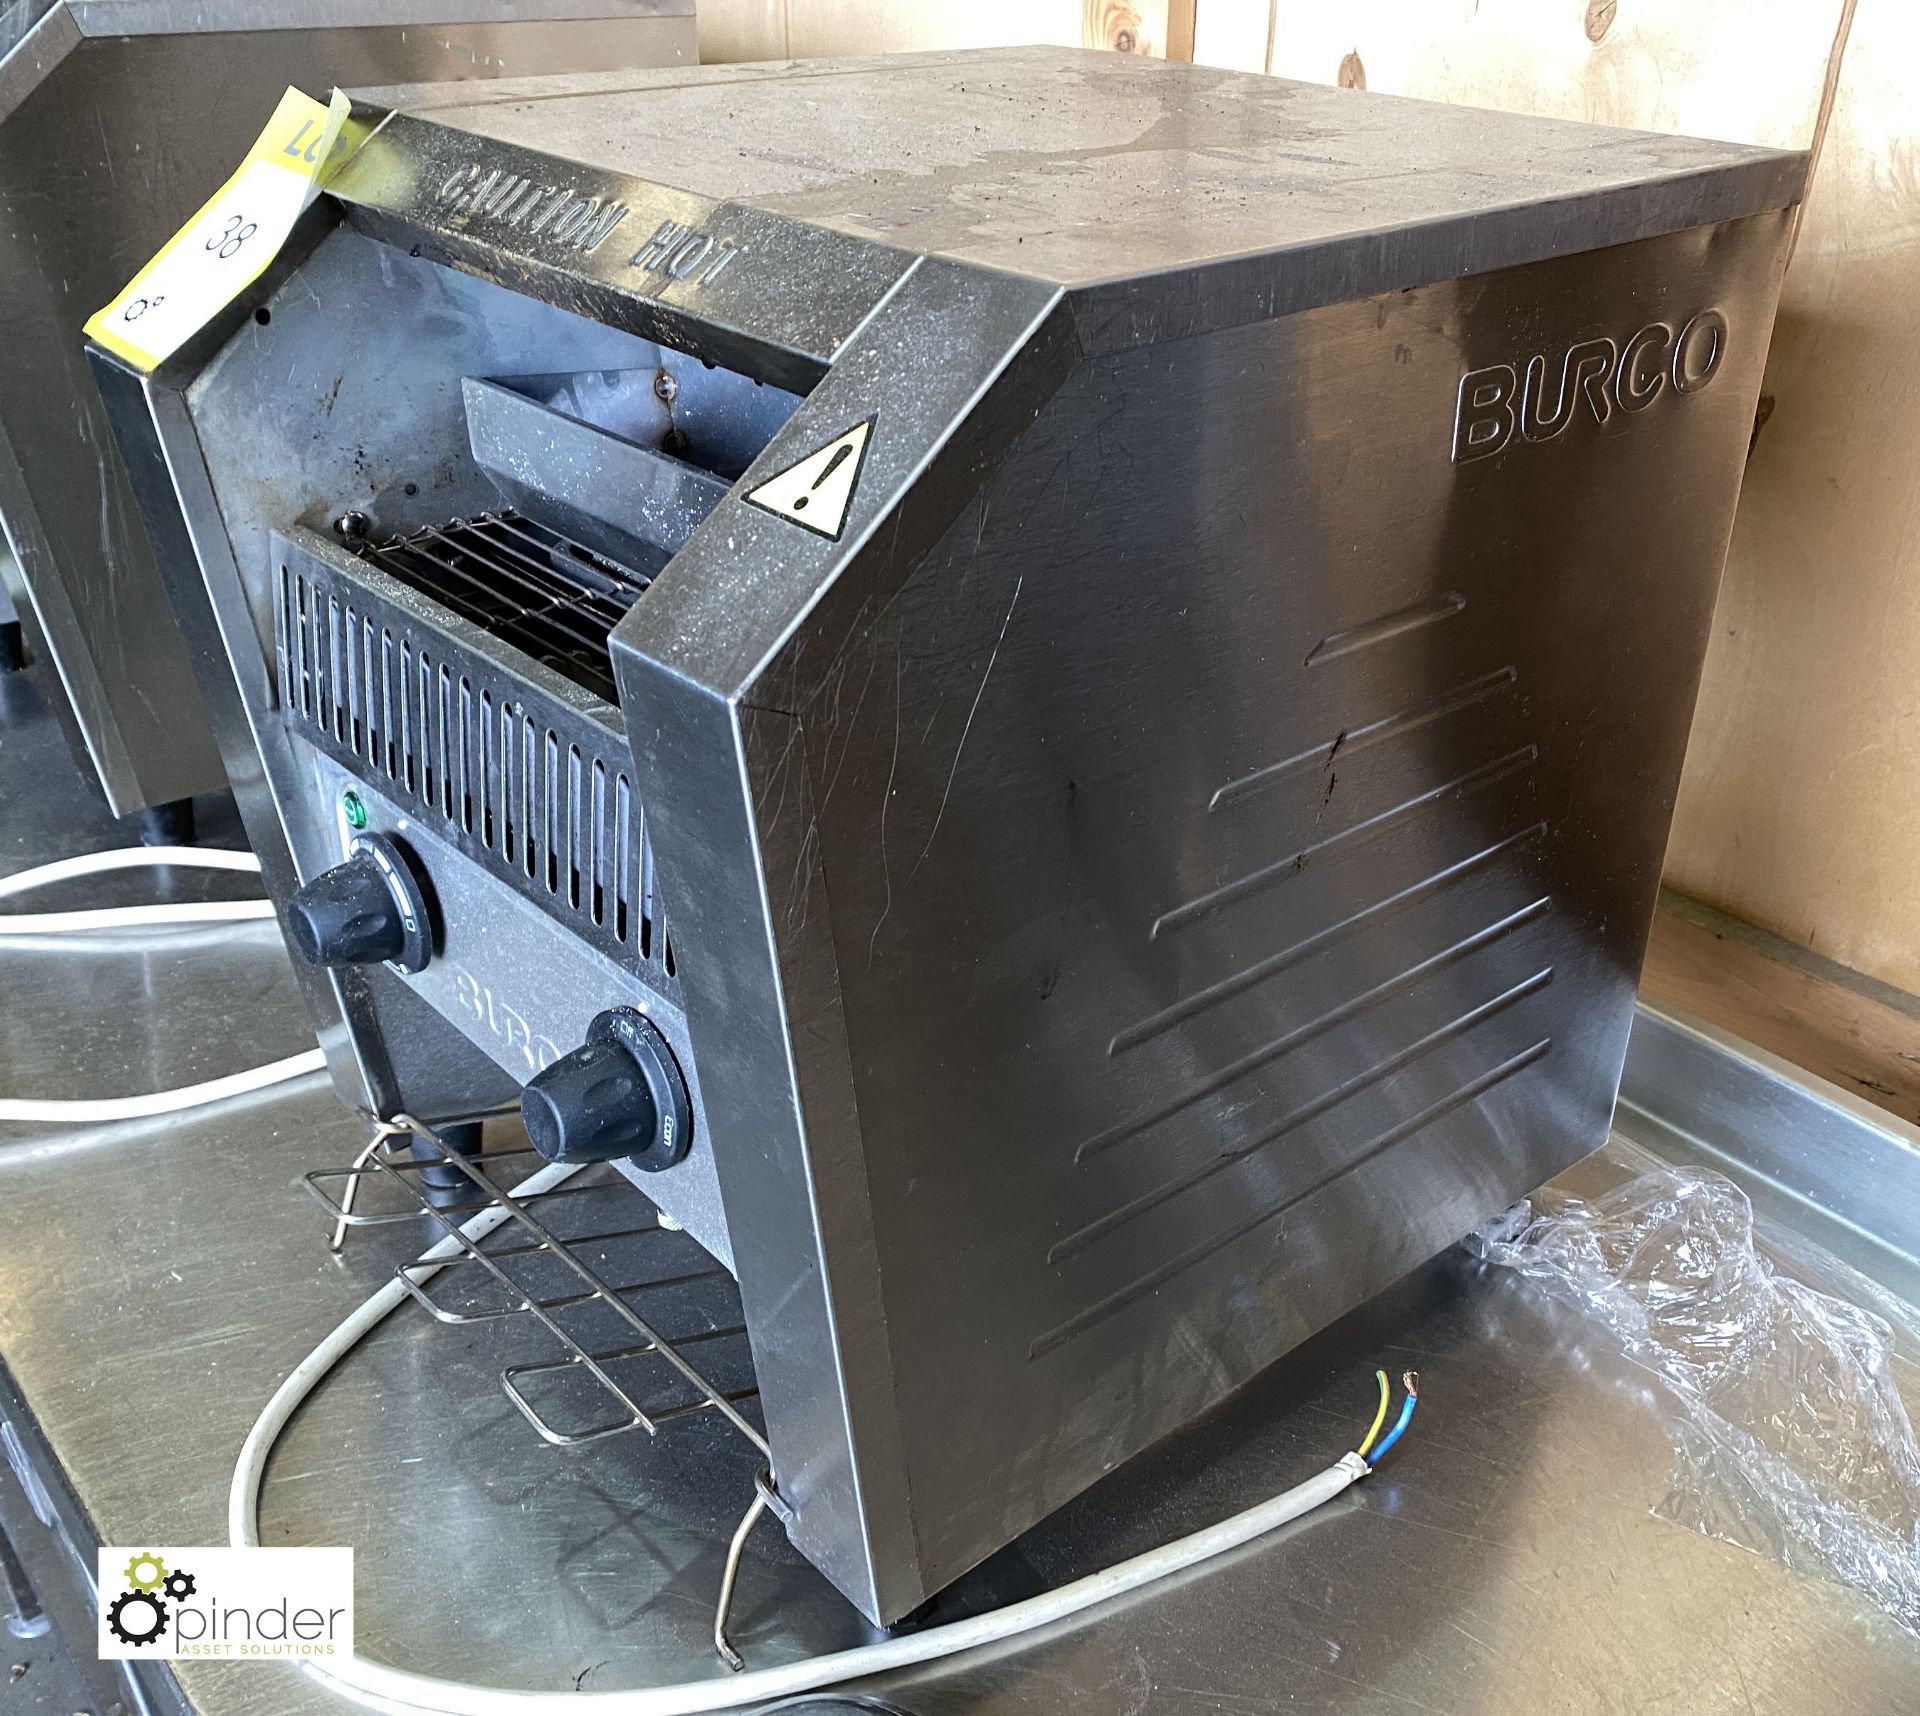 Burco BC TSCBV01 stainless steel Conveyor Toaster, 240volts (LOCATION: Stanningley, Leeds) - Image 3 of 4